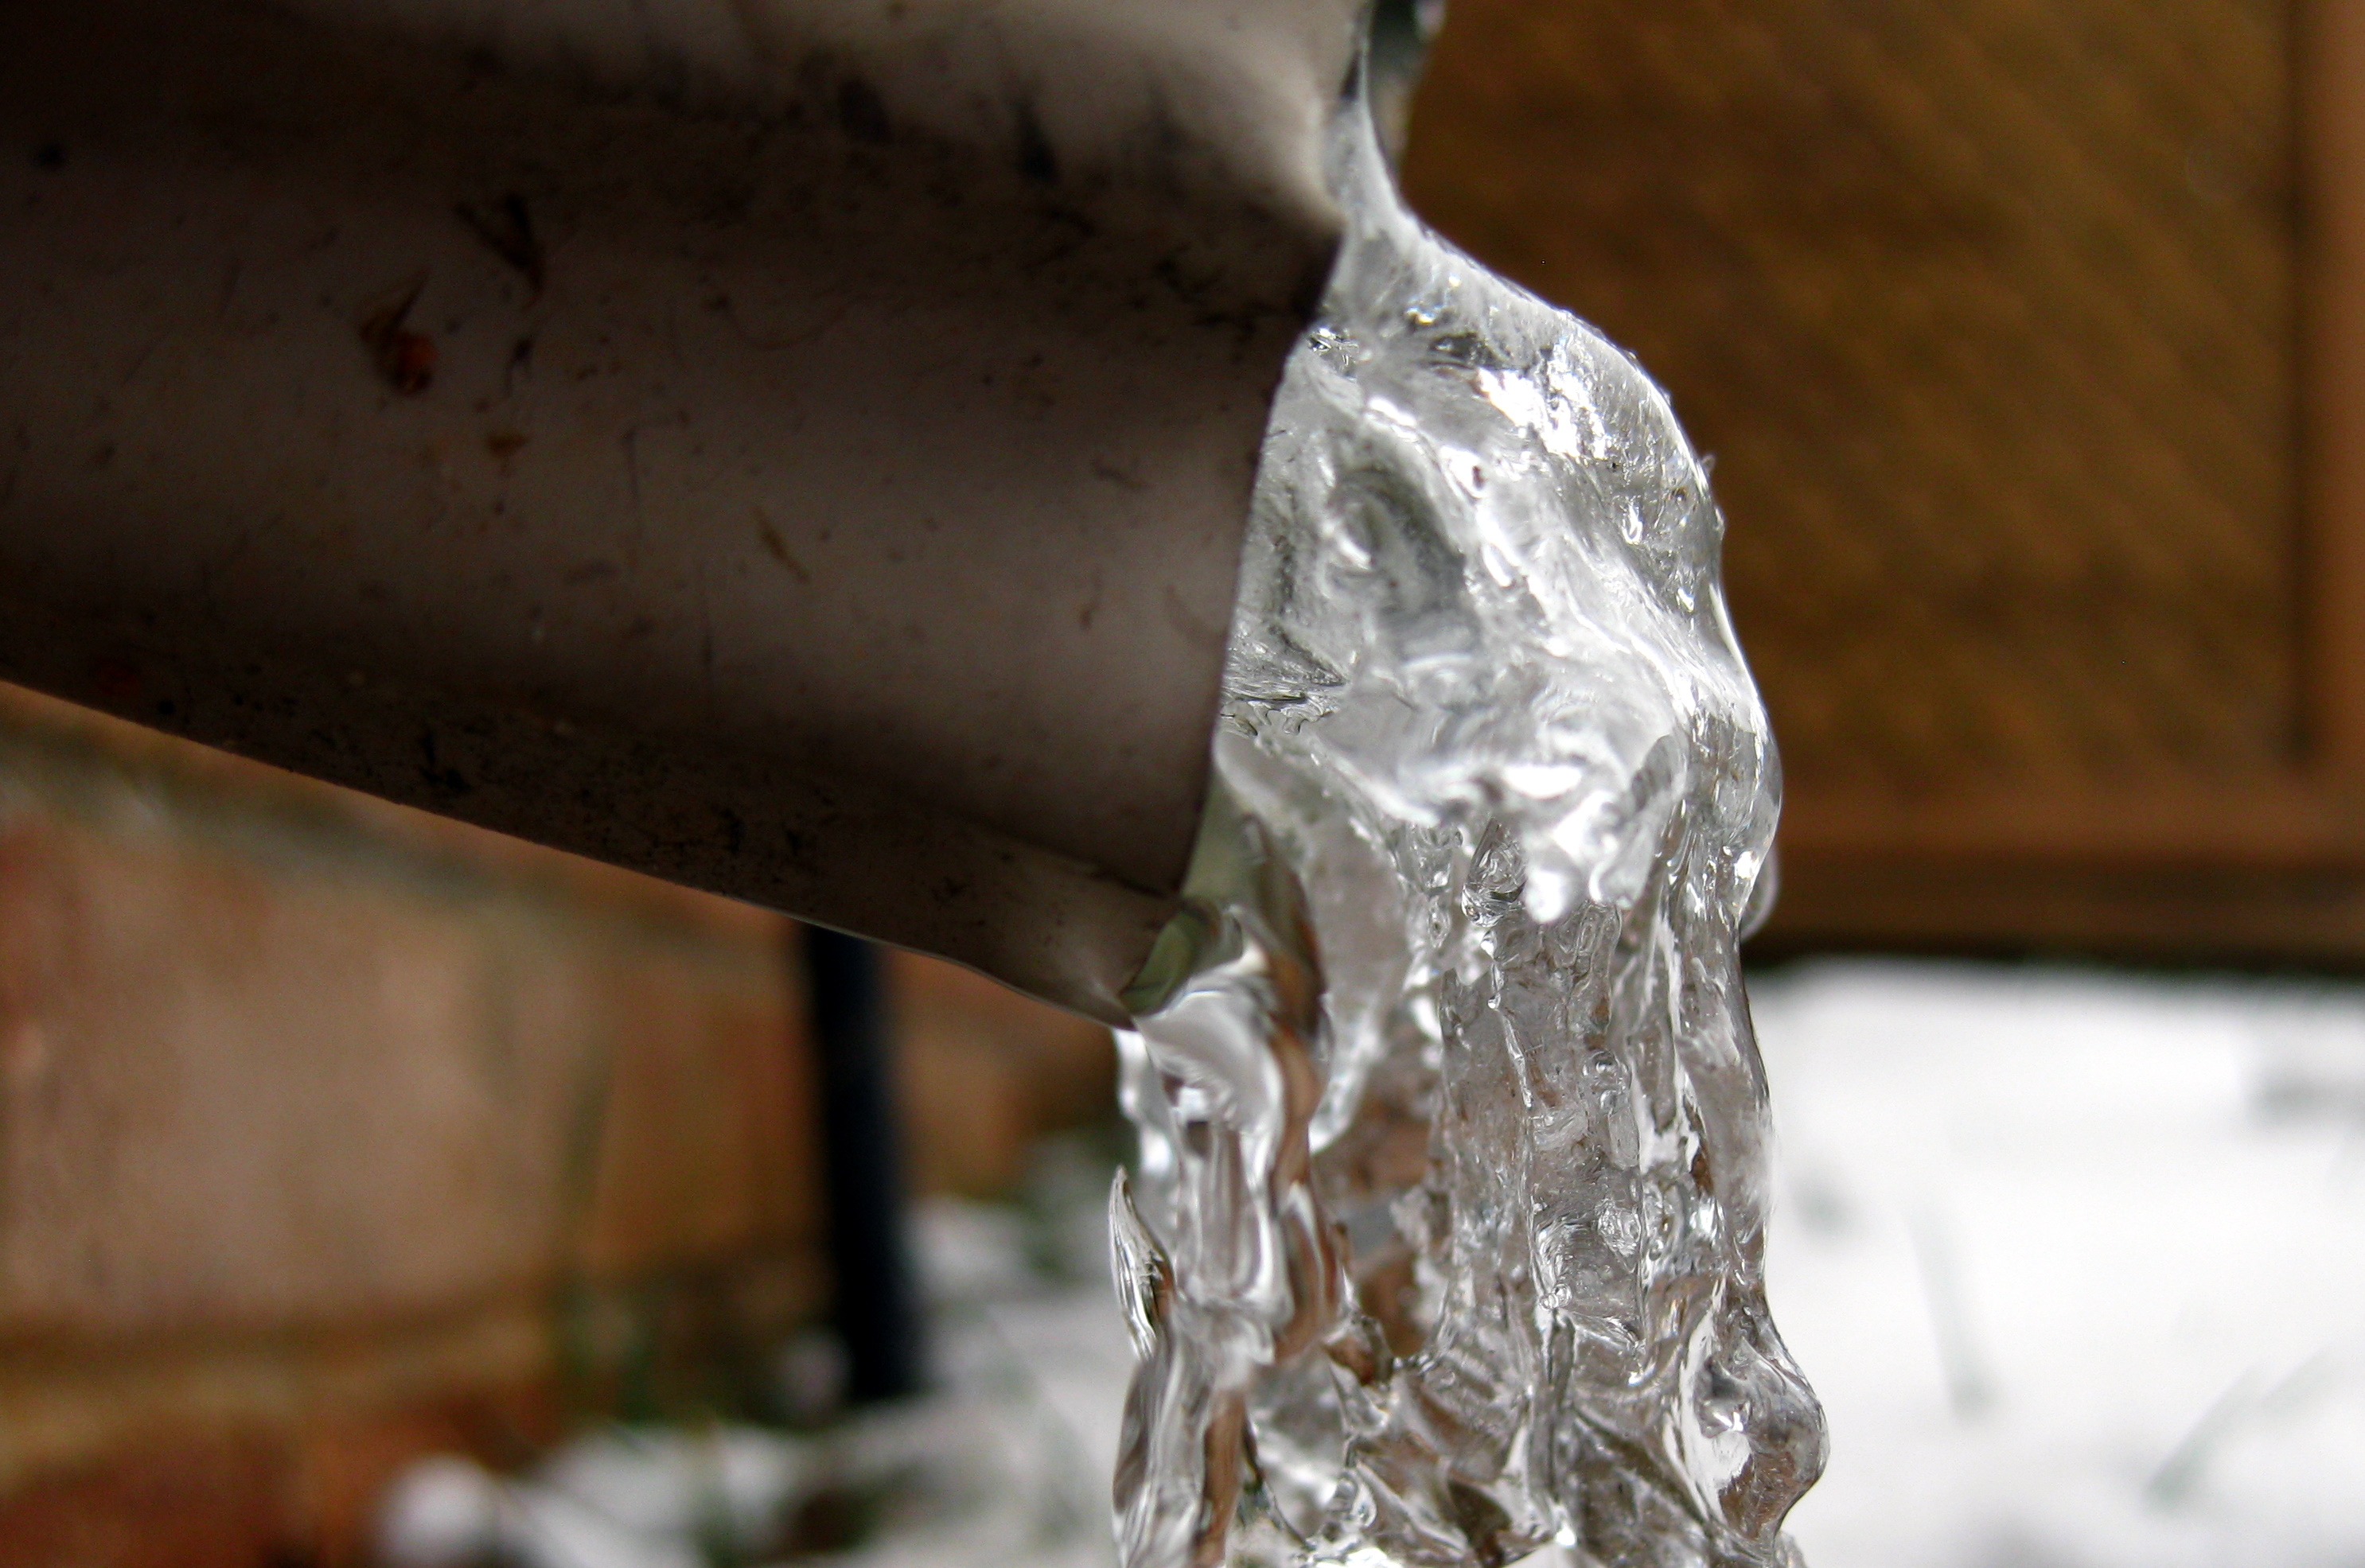 Winterizing pipes in the fall can prevent water from freezing in your pipes, which can lead to costly damage.